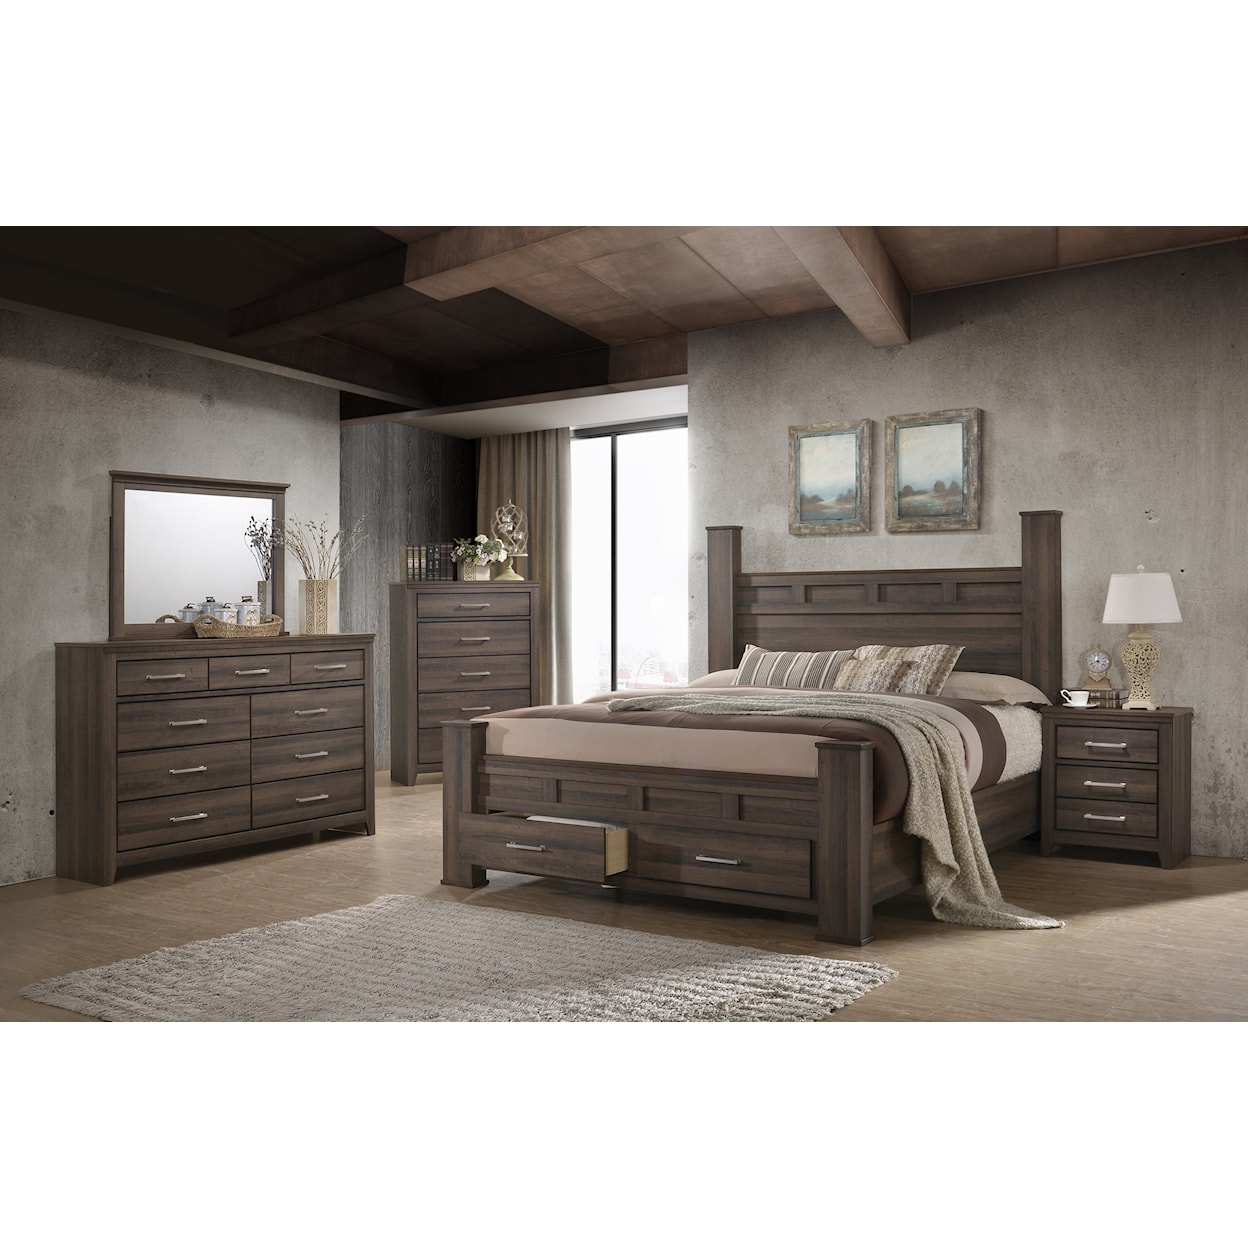 Lifestyle 7316 6 Piece King Poster Bedroom Group